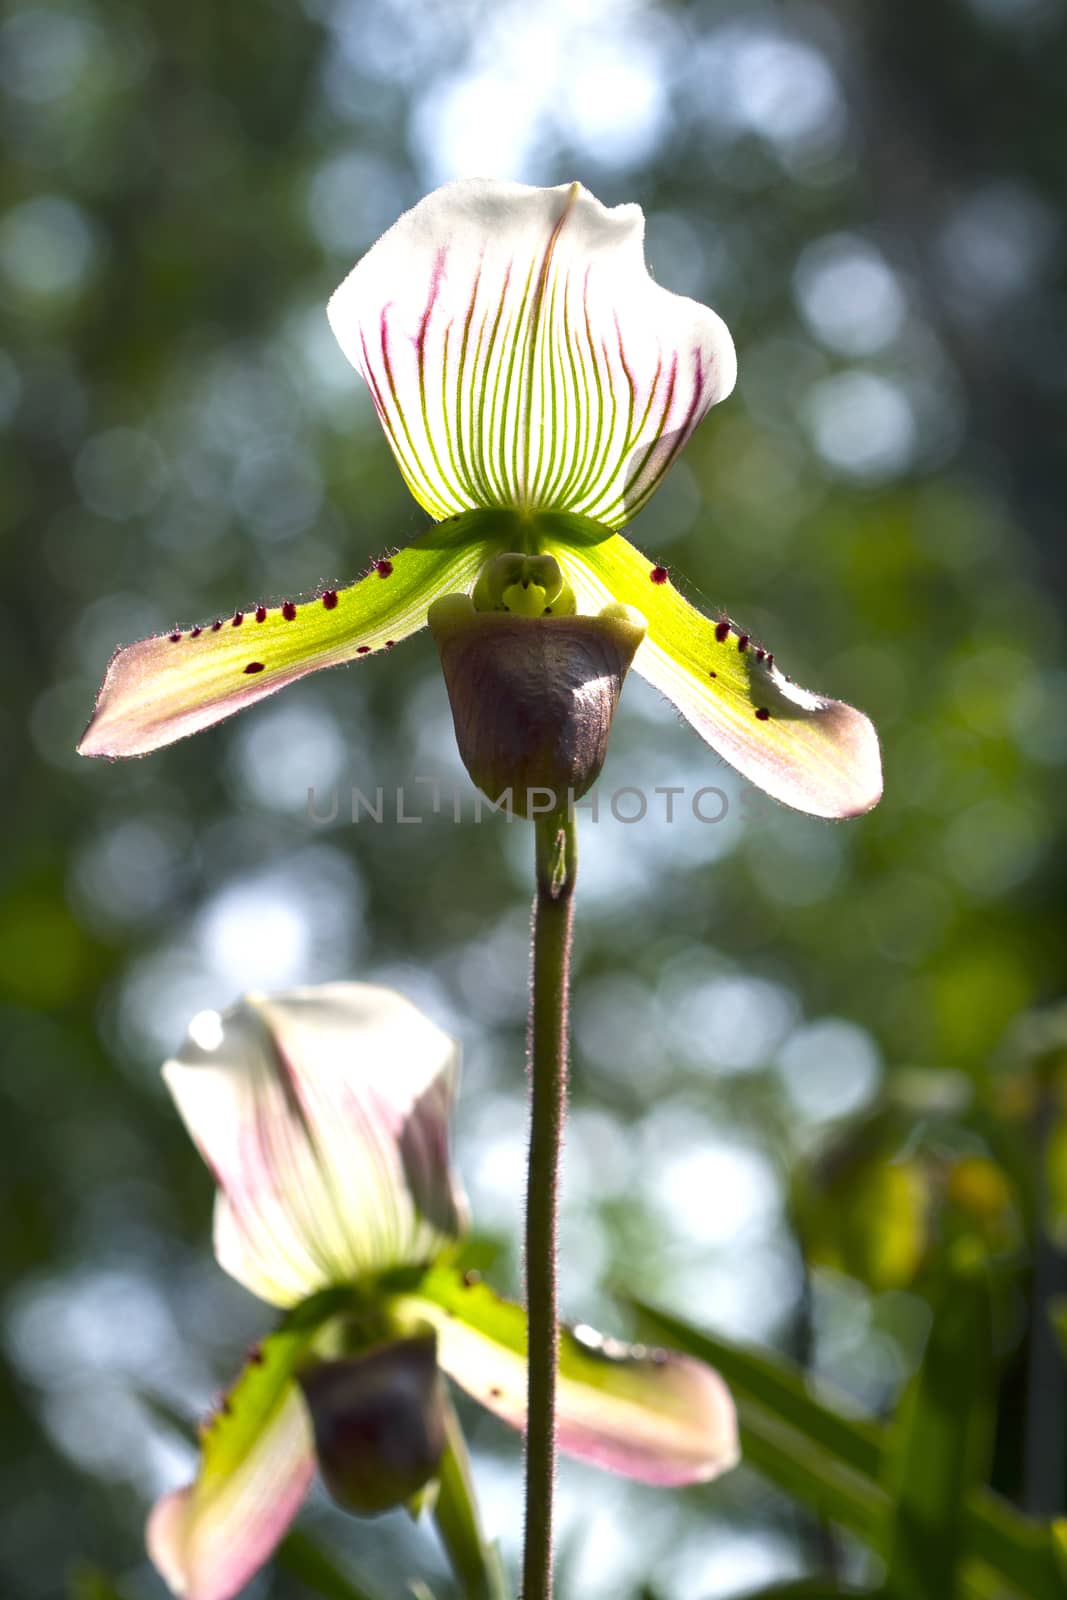 Paphiopedilum orchids in the middle of nature.